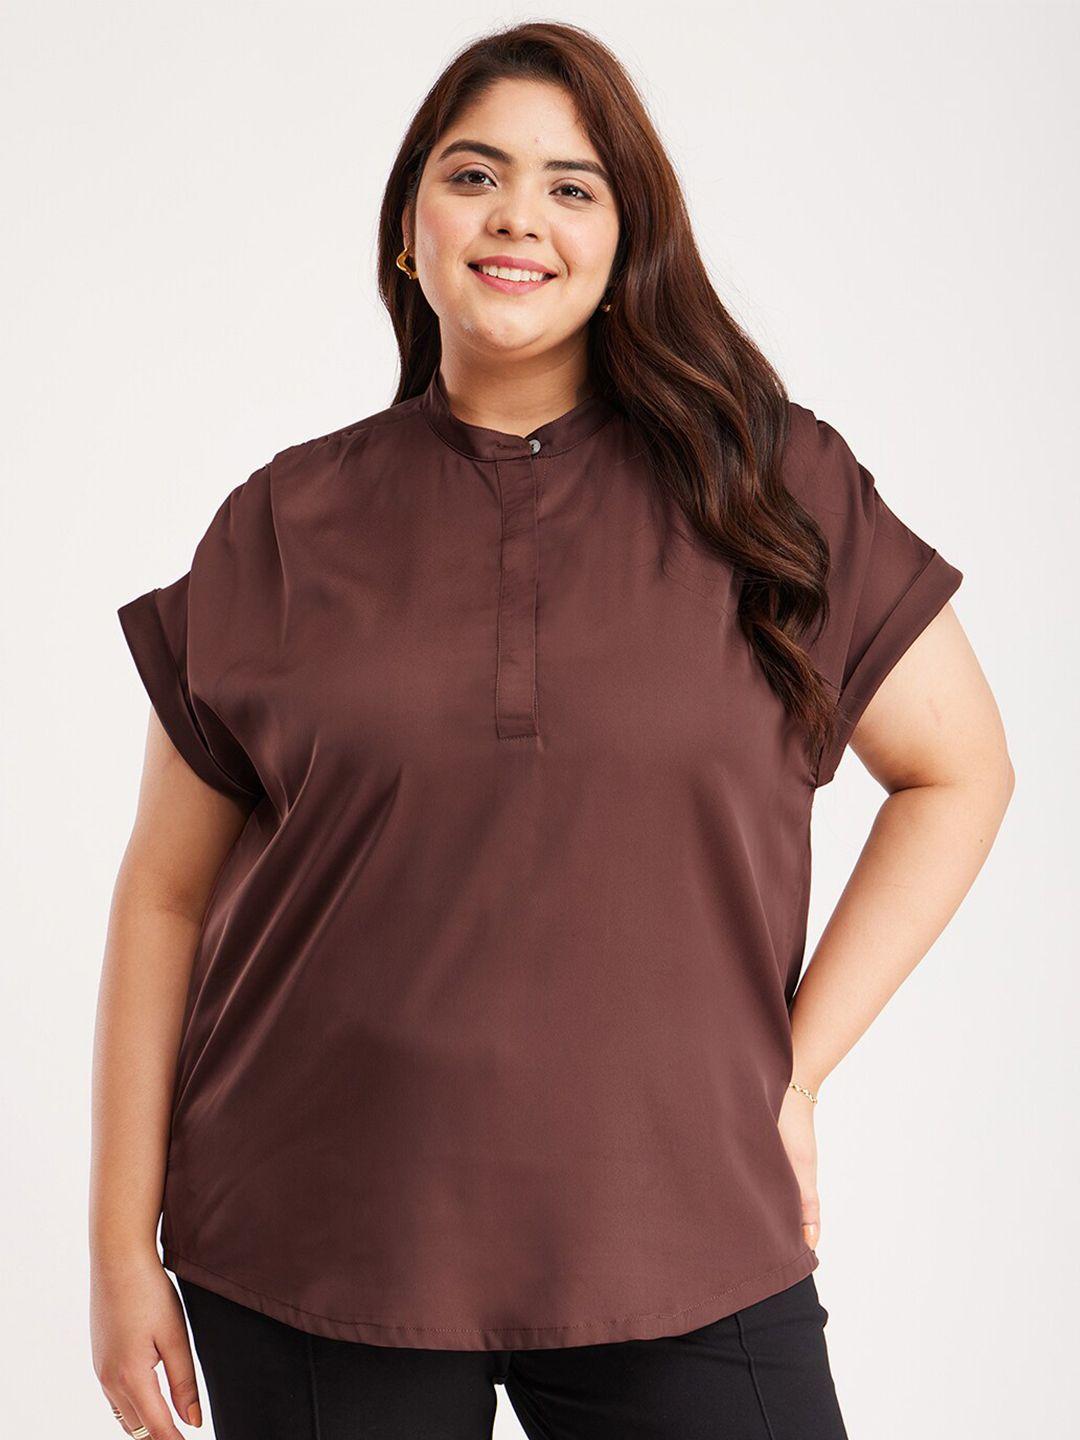 fablestreet x plus size mandarin collar extended sleeves satin shirt style top